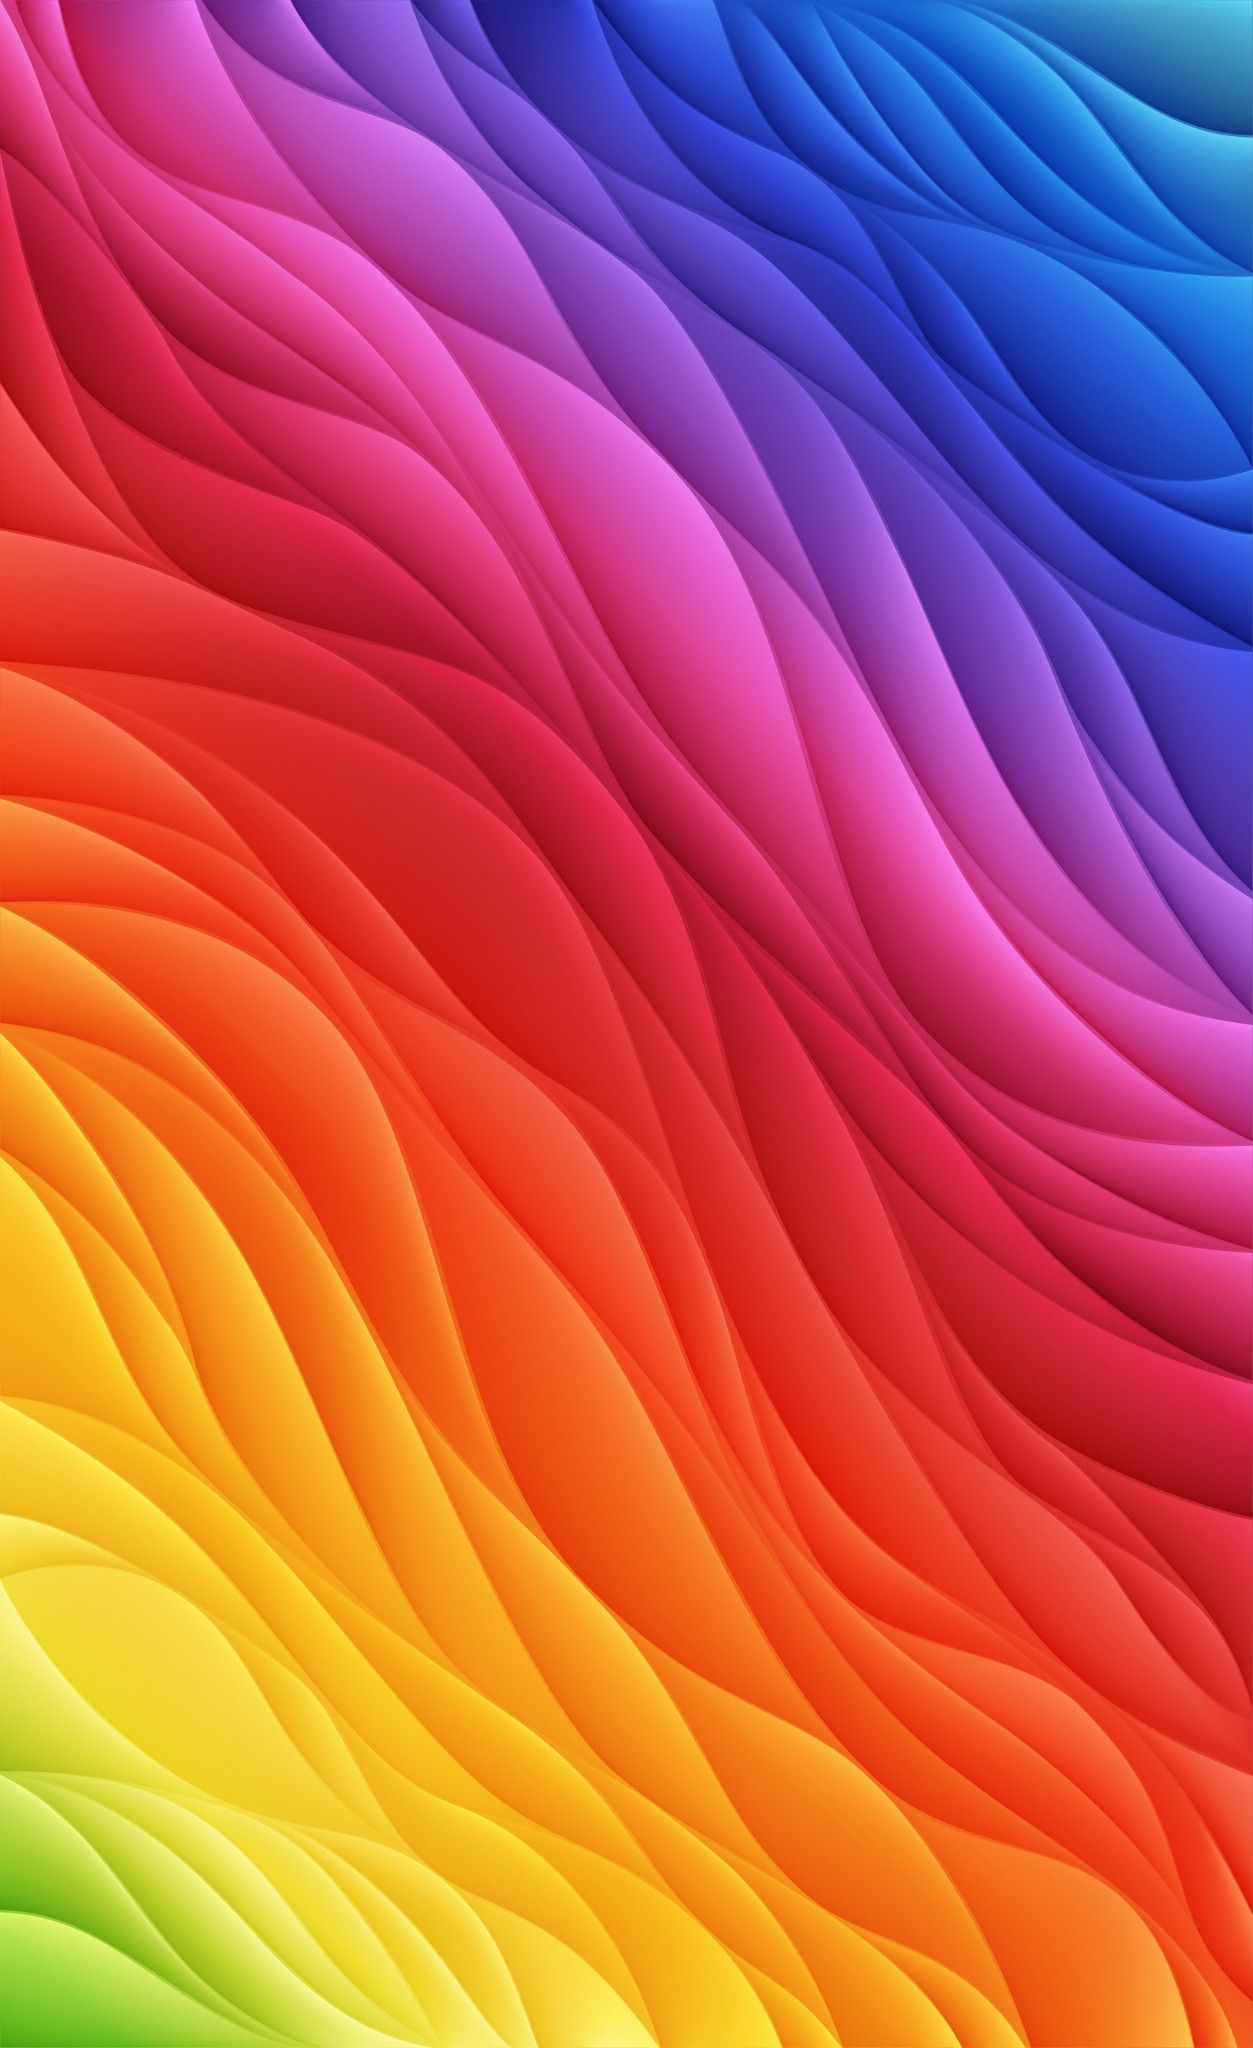 abstract colorful wave